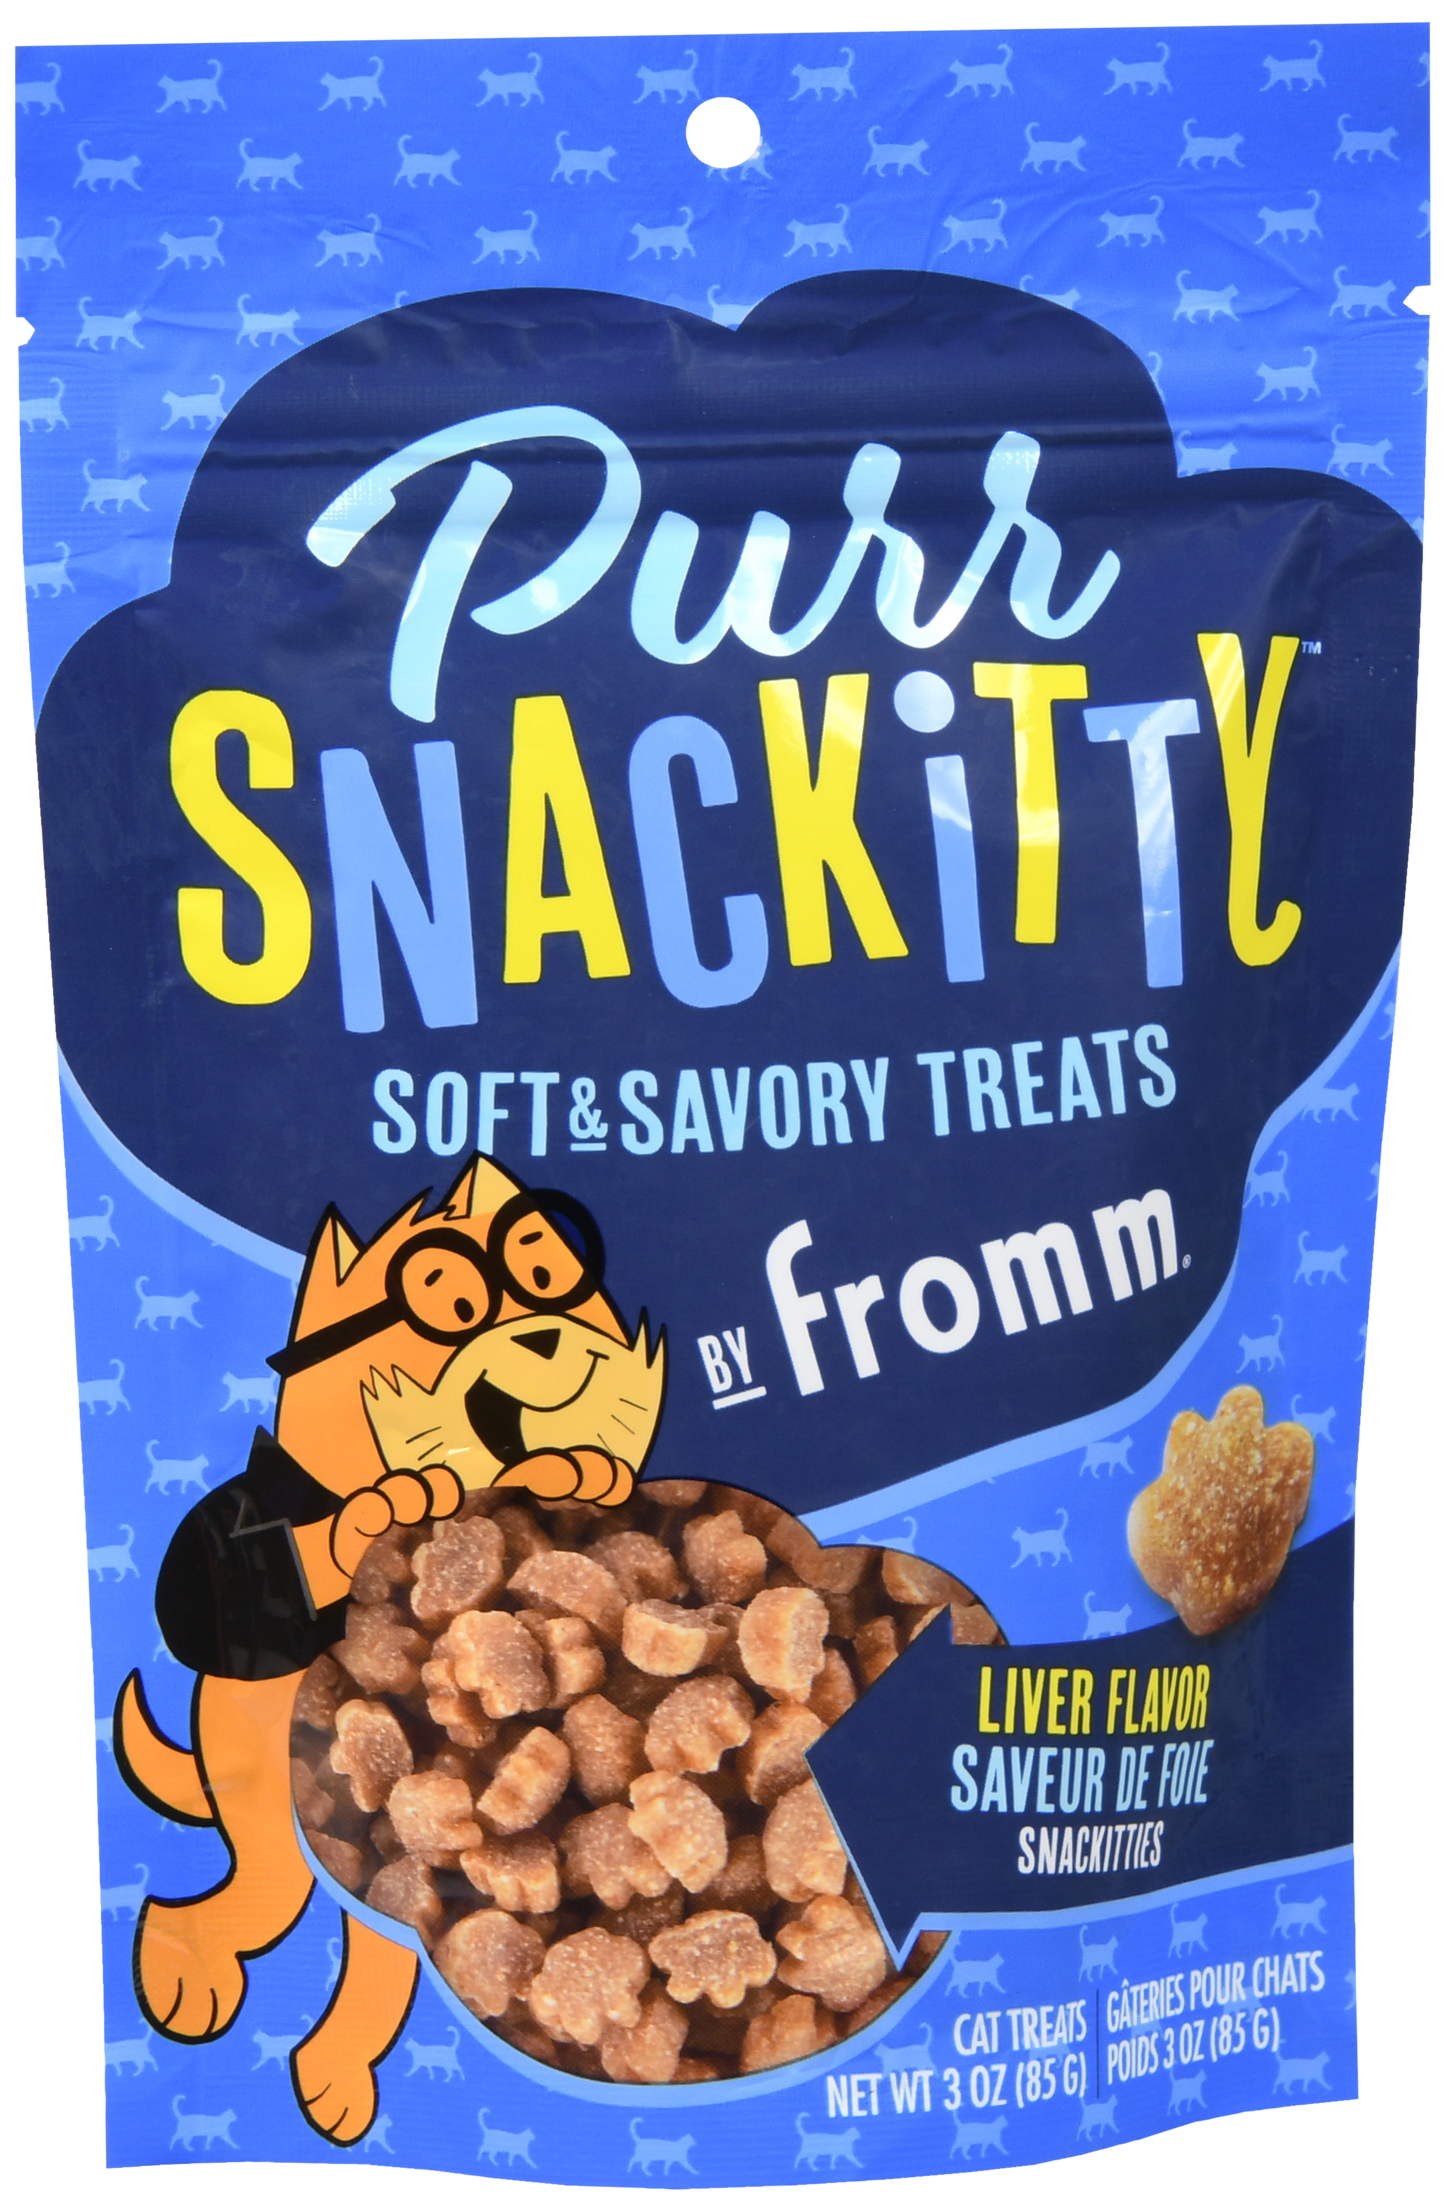 'Fromm Soft & Savory' PurrSnackitty Cat Treats